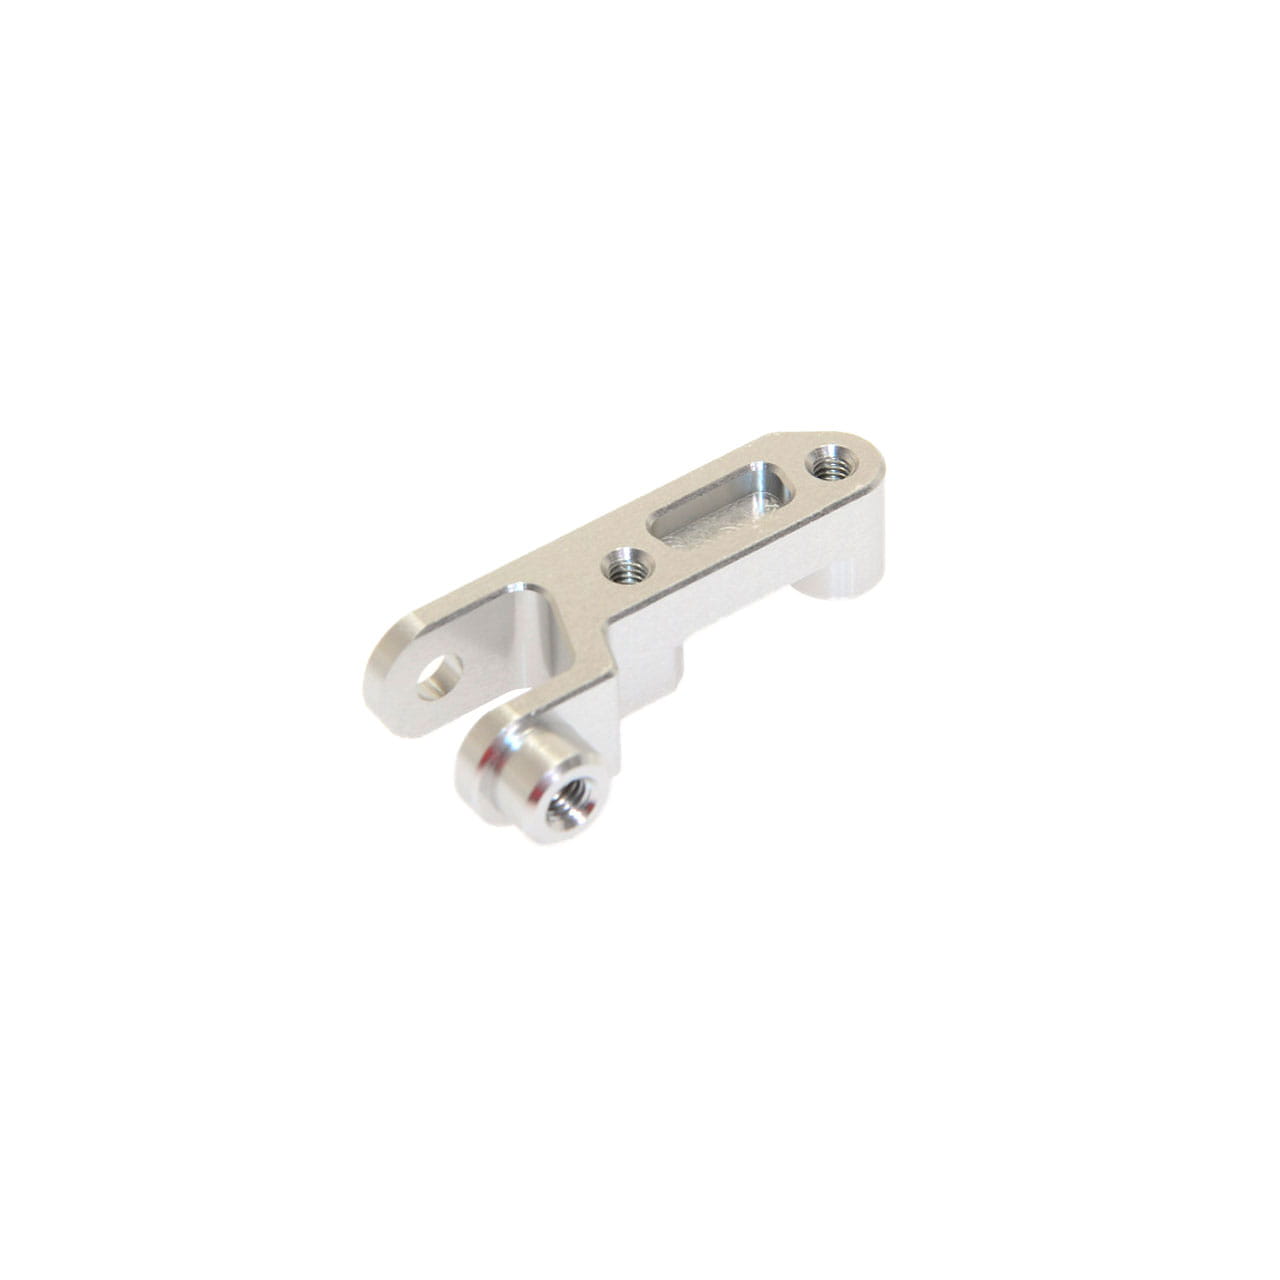 CEN-Racing CNC Aluminum 3rd link mount (silver anodized)